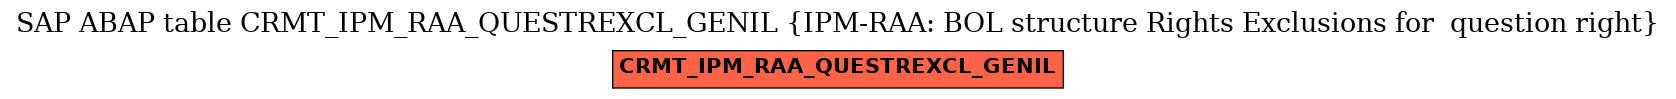 E-R Diagram for table CRMT_IPM_RAA_QUESTREXCL_GENIL (IPM-RAA: BOL structure Rights Exclusions for  question right)